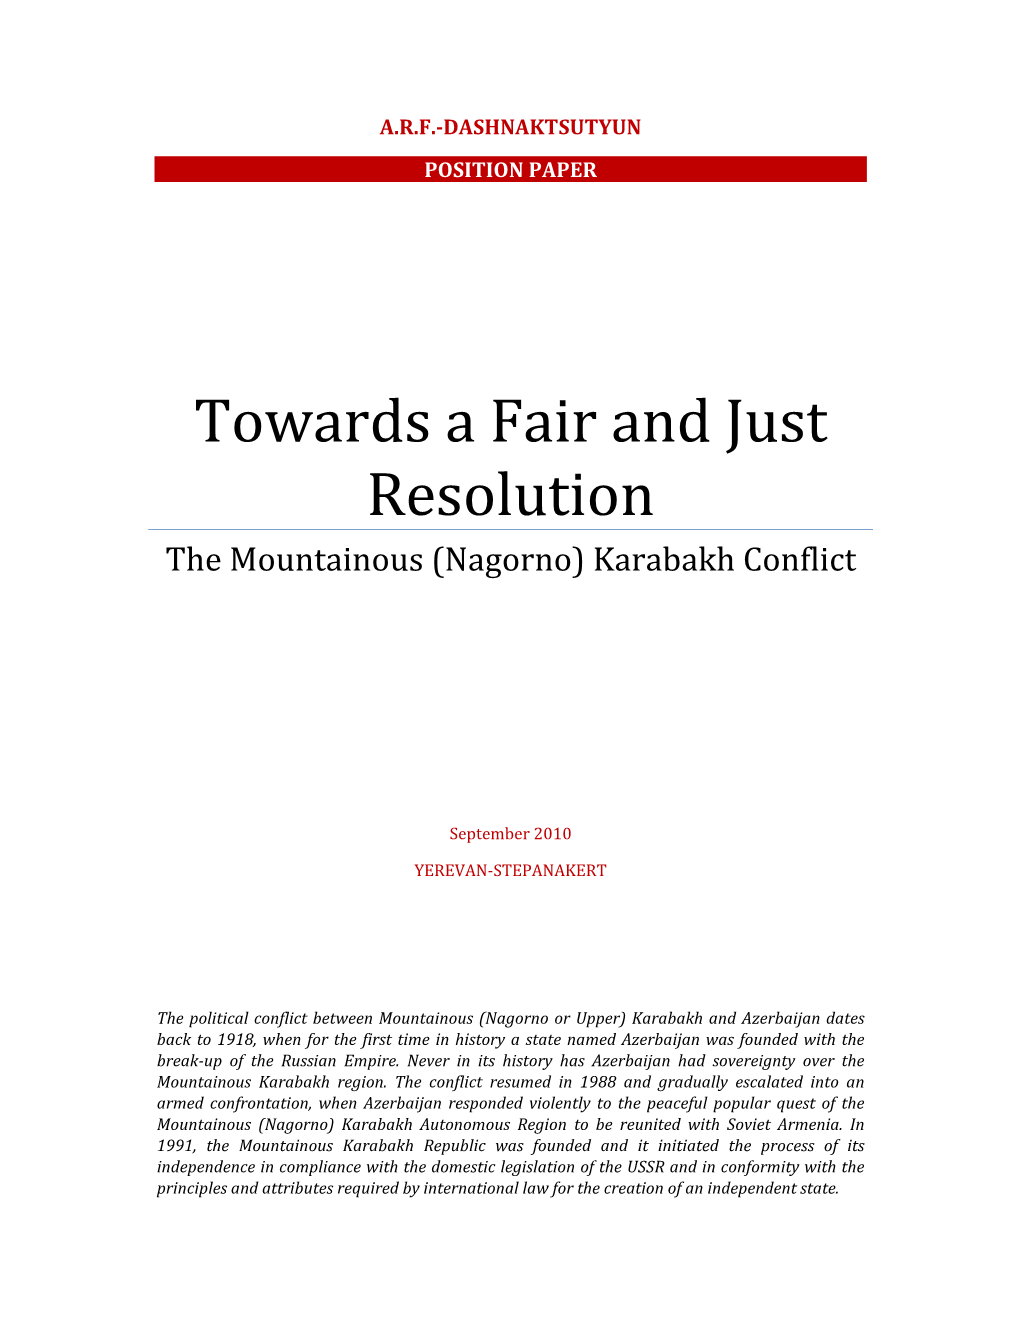 Towards a Fair and Just Resolution the Mountainous (Nagorno) Karabakh Conflict